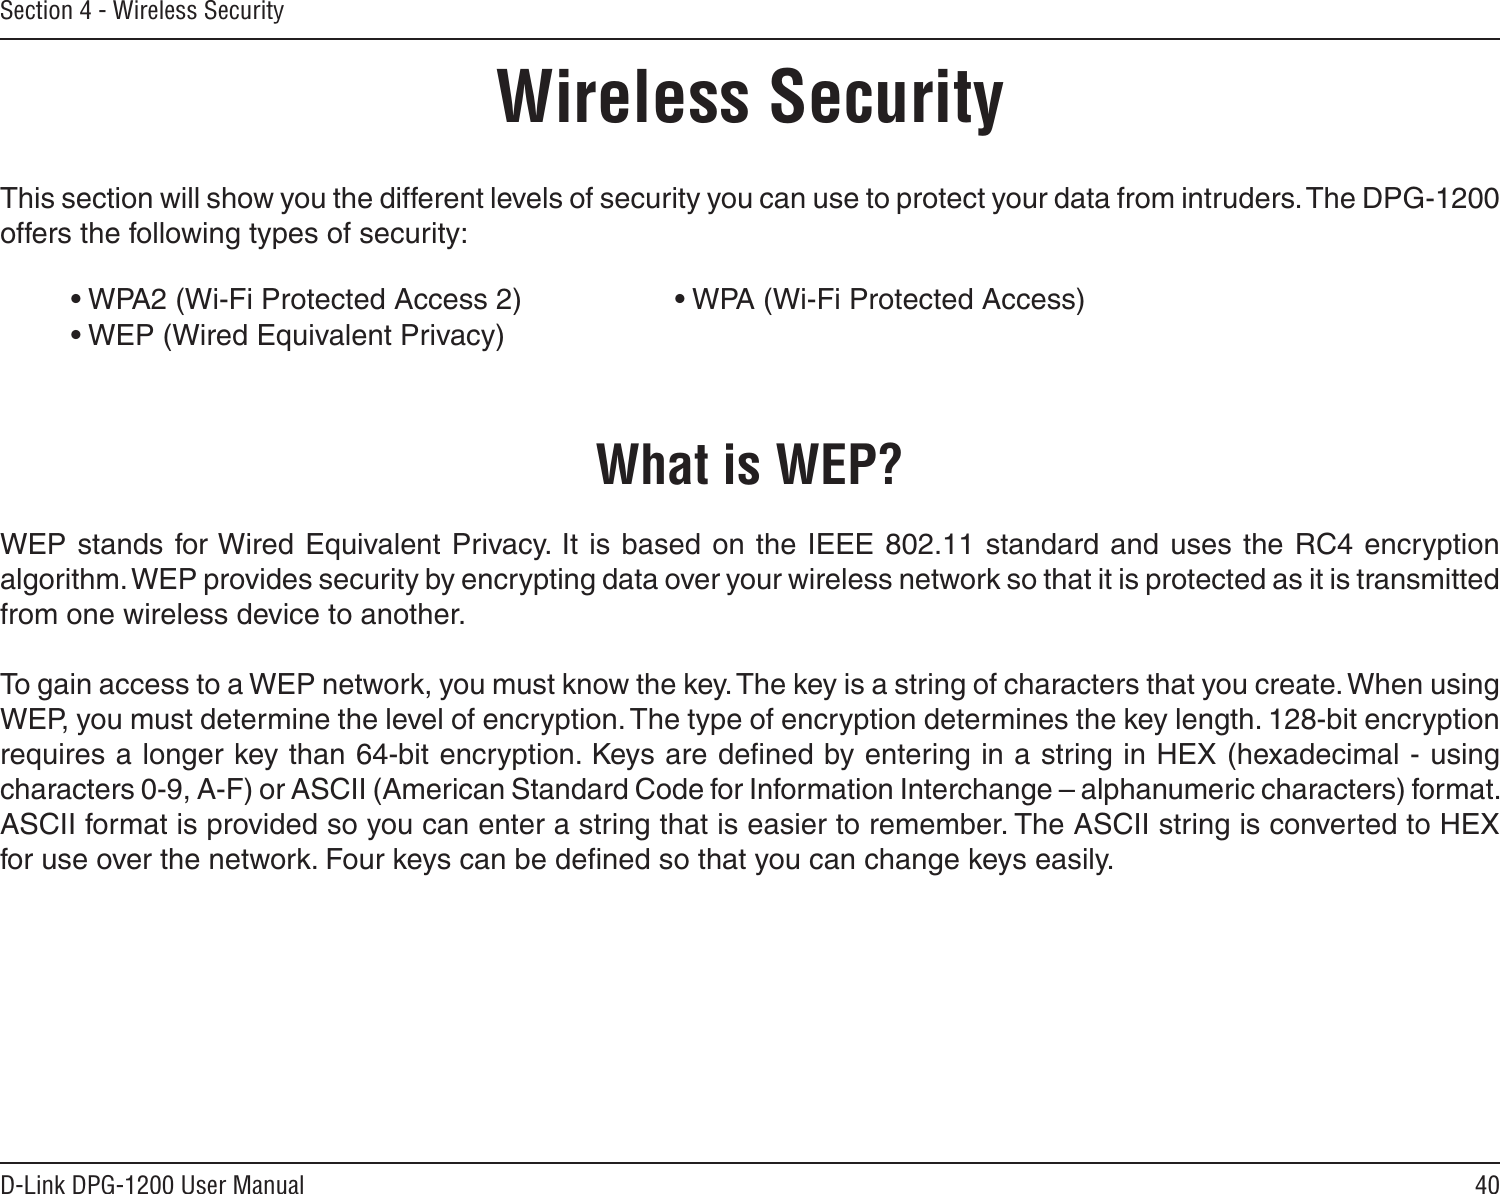 40D-Link DPG-1200 User ManualSection 4 - Wireless SecurityWireless SecurityThis section will show you the different levels of security you can use to protect your data from intruders. The DPG-1200 offers the following types of security:• WPA2 (Wi-Fi Protected Access 2)     • WPA (Wi-Fi Protected Access) • WEP (Wired Equivalent Privacy)     What is WEP?WEP stands  for Wired  Equivalent Privacy. It  is based on the IEEE 802.11  standard and uses  the RC4 encryption algorithm. WEP provides security by encrypting data over your wireless network so that it is protected as it is transmitted from one wireless device to another.To gain access to a WEP network, you must know the key. The key is a string of characters that you create. When using WEP, you must determine the level of encryption. The type of encryption determines the key length. 128-bit encryption requires a longer key than 64-bit encryption. Keys are deﬁned by entering in a string in HEX (hexadecimal - using characters 0-9, A-F) or ASCII (American Standard Code for Information Interchange – alphanumeric characters) format. ASCII format is provided so you can enter a string that is easier to remember. The ASCII string is converted to HEX for use over the network. Four keys can be deﬁned so that you can change keys easily.